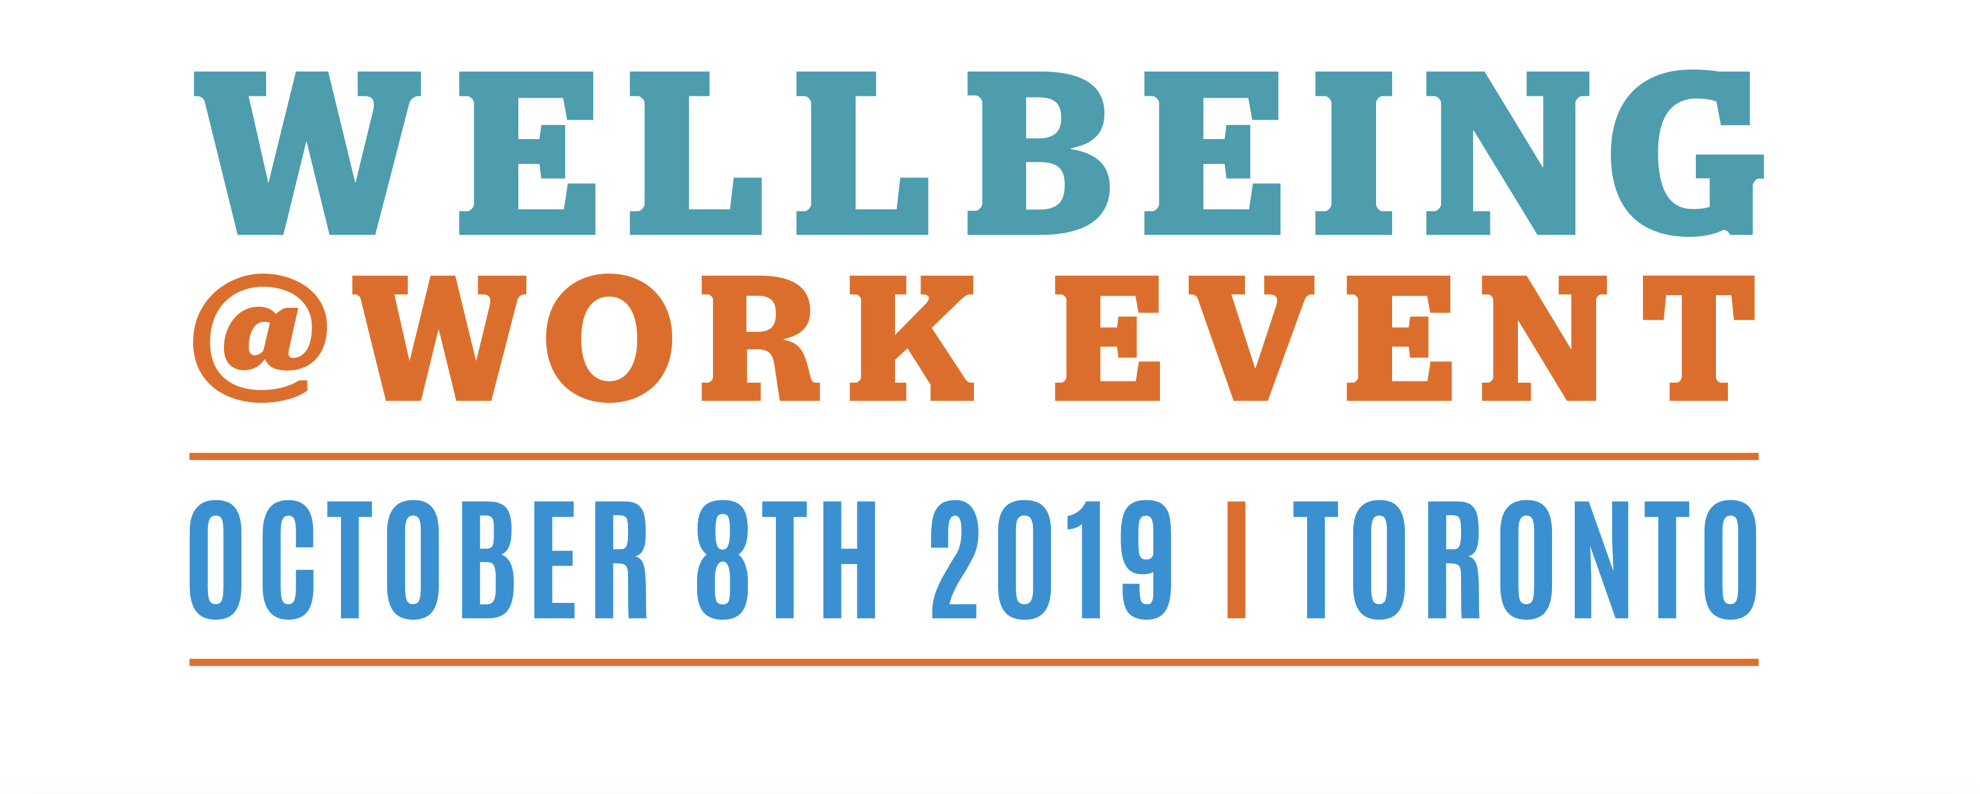 wellbeing at work event